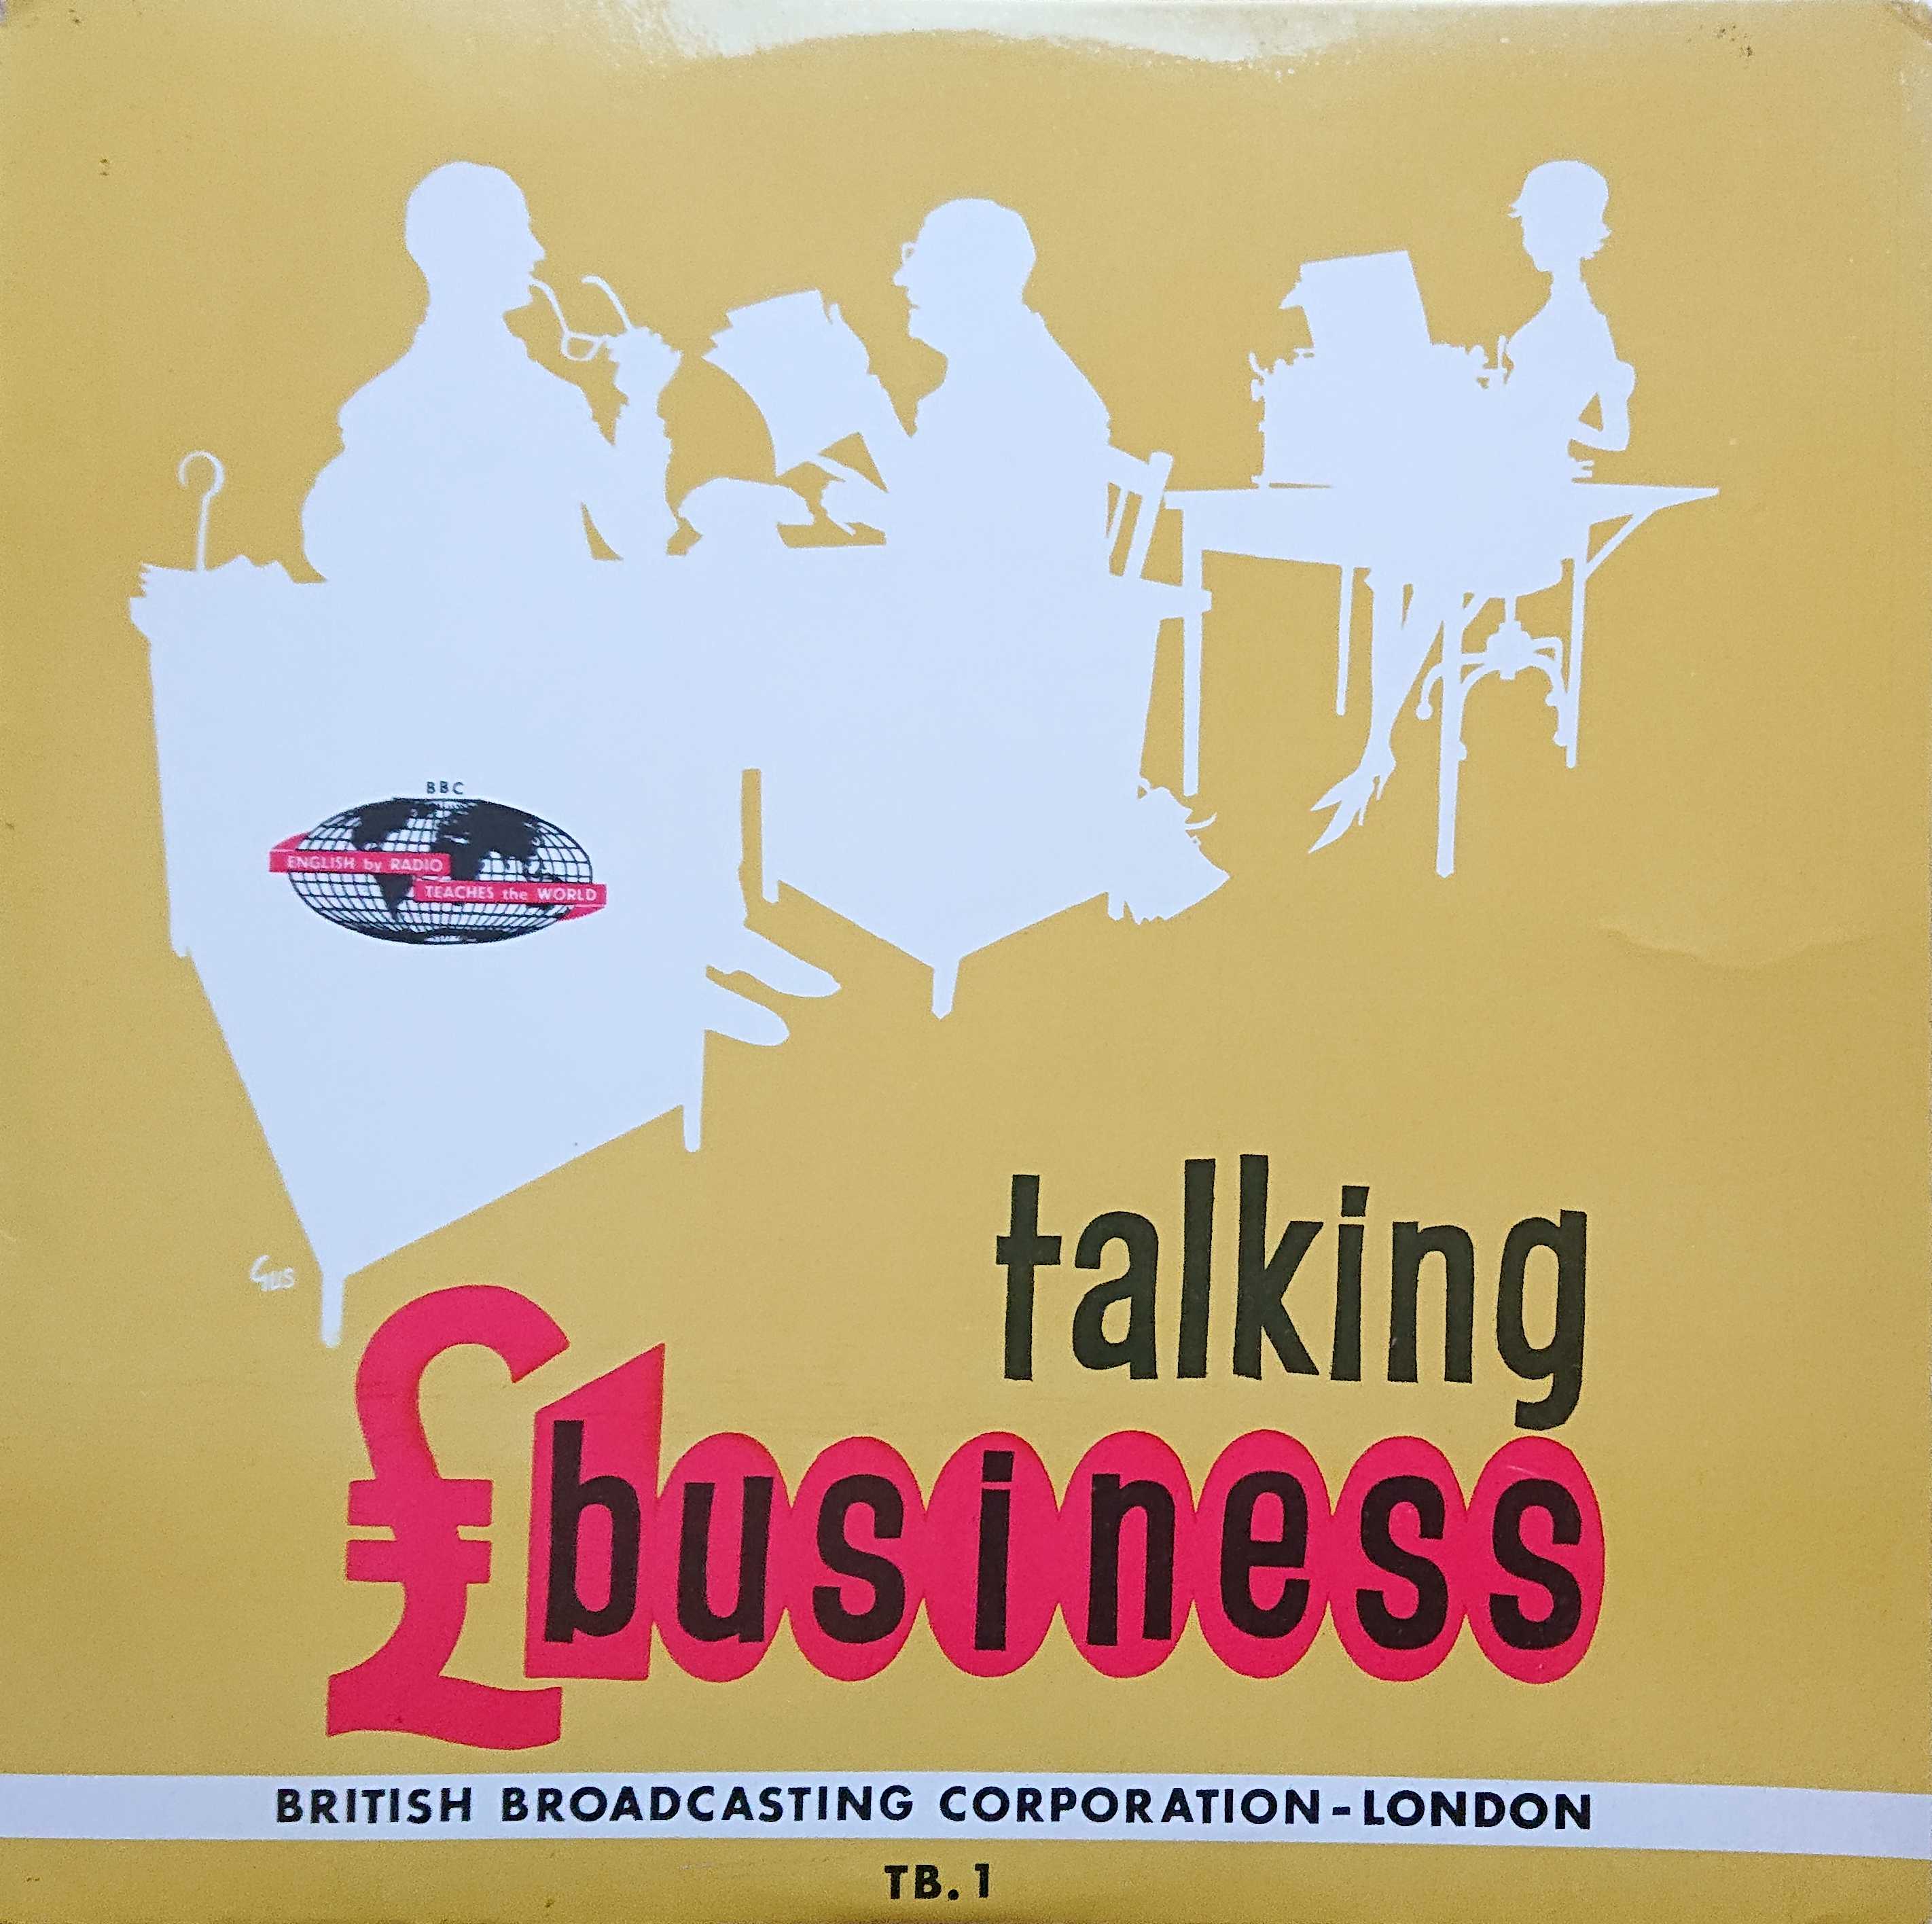 Picture of Talking business by artist Michael Innes from the BBC 10inches - Records and Tapes library